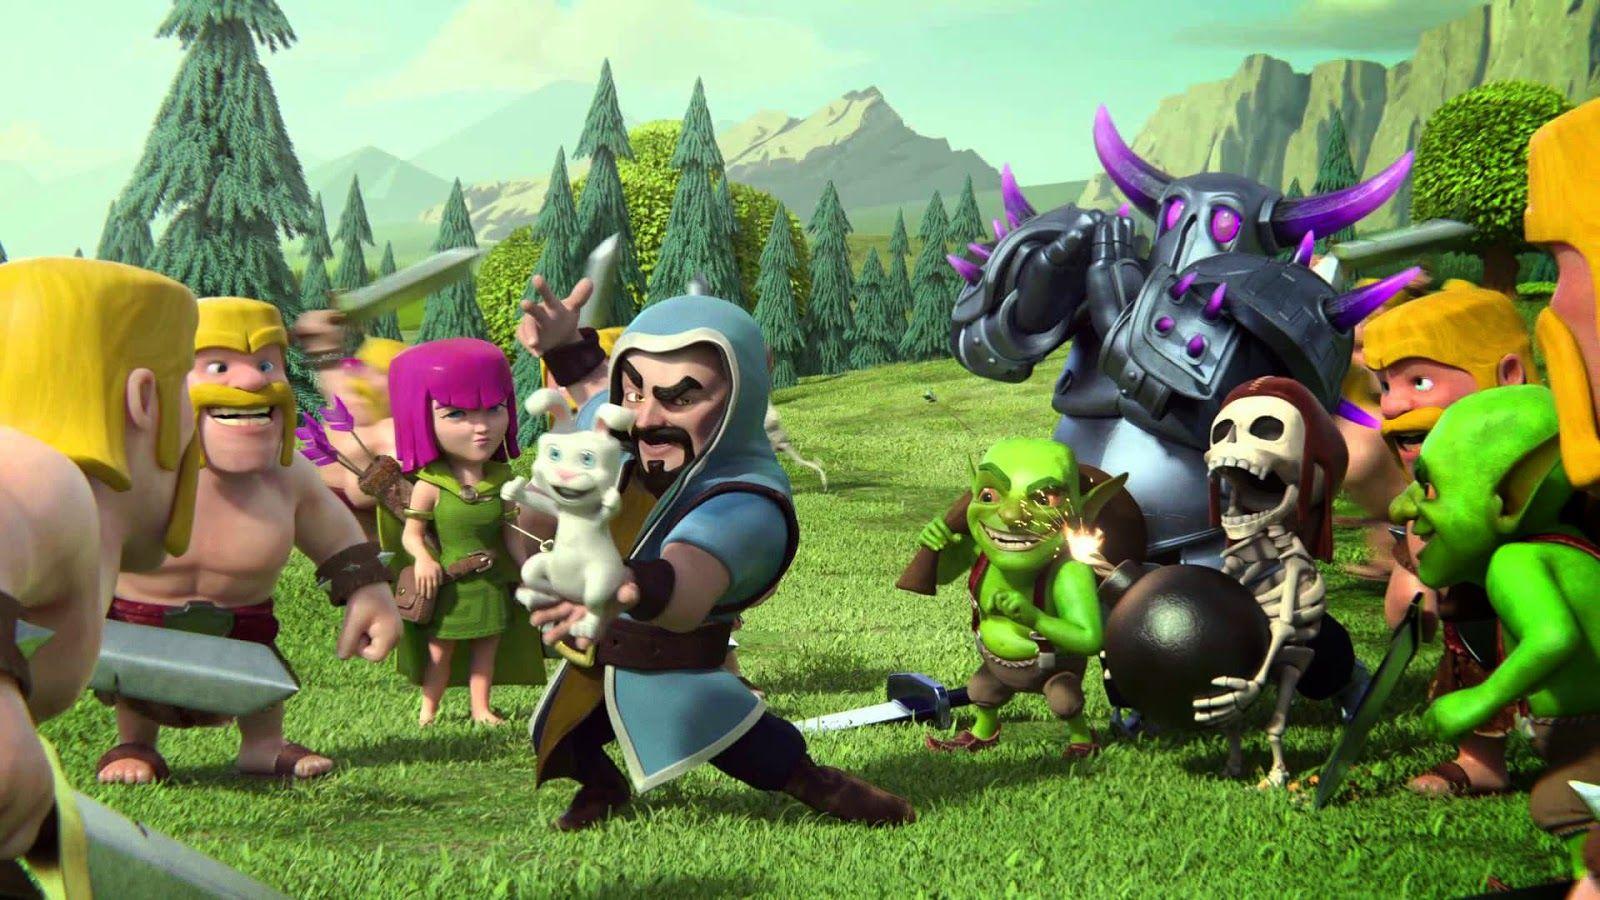 House Of Wallpapers - Clash Royale Wallpaper Pc - HD Wallpaper 